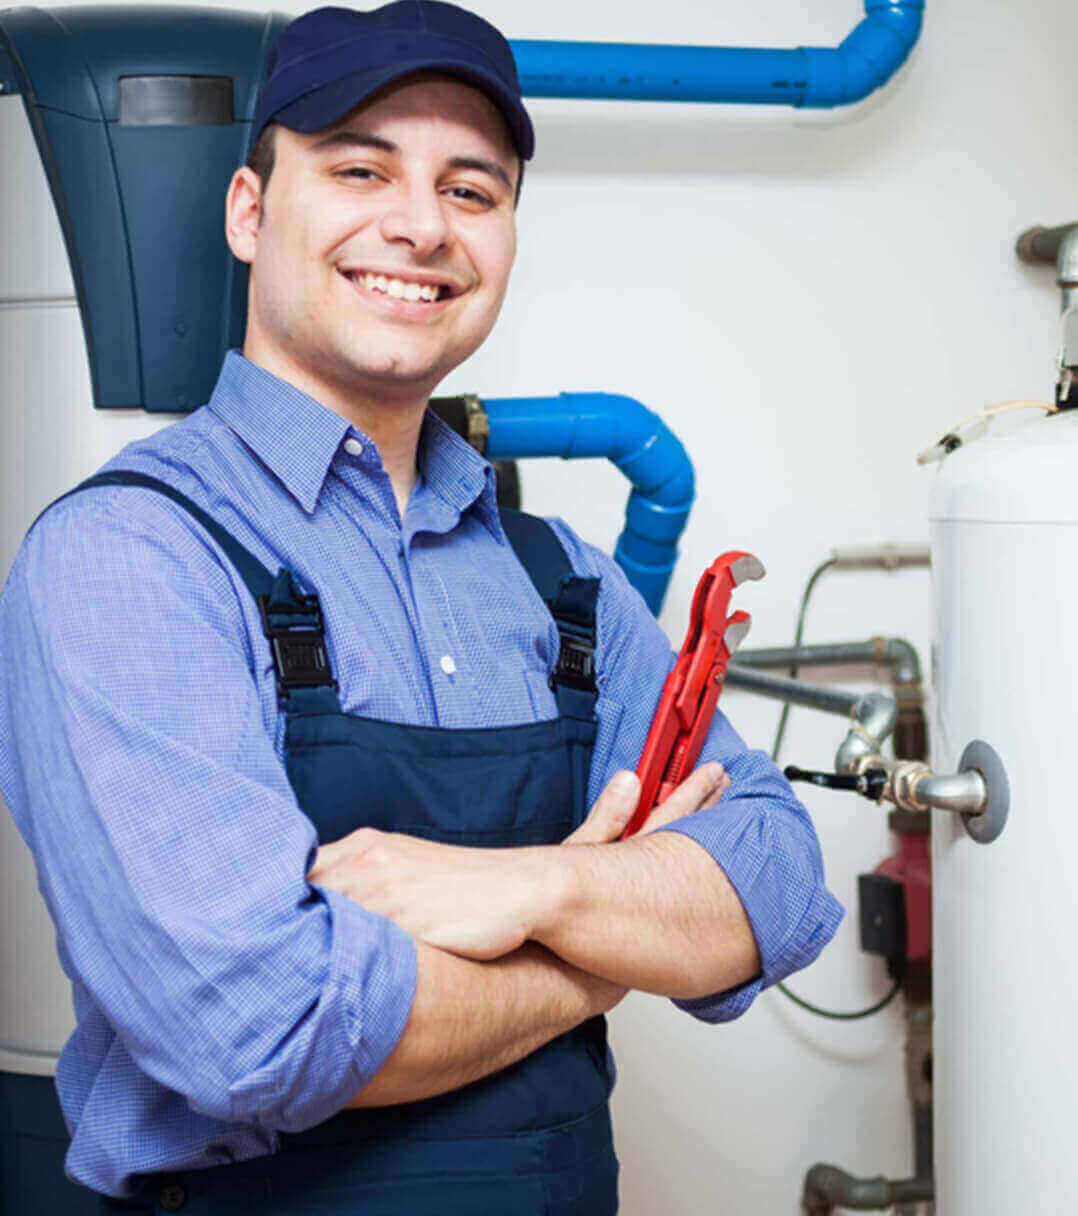 Man smiling with tool